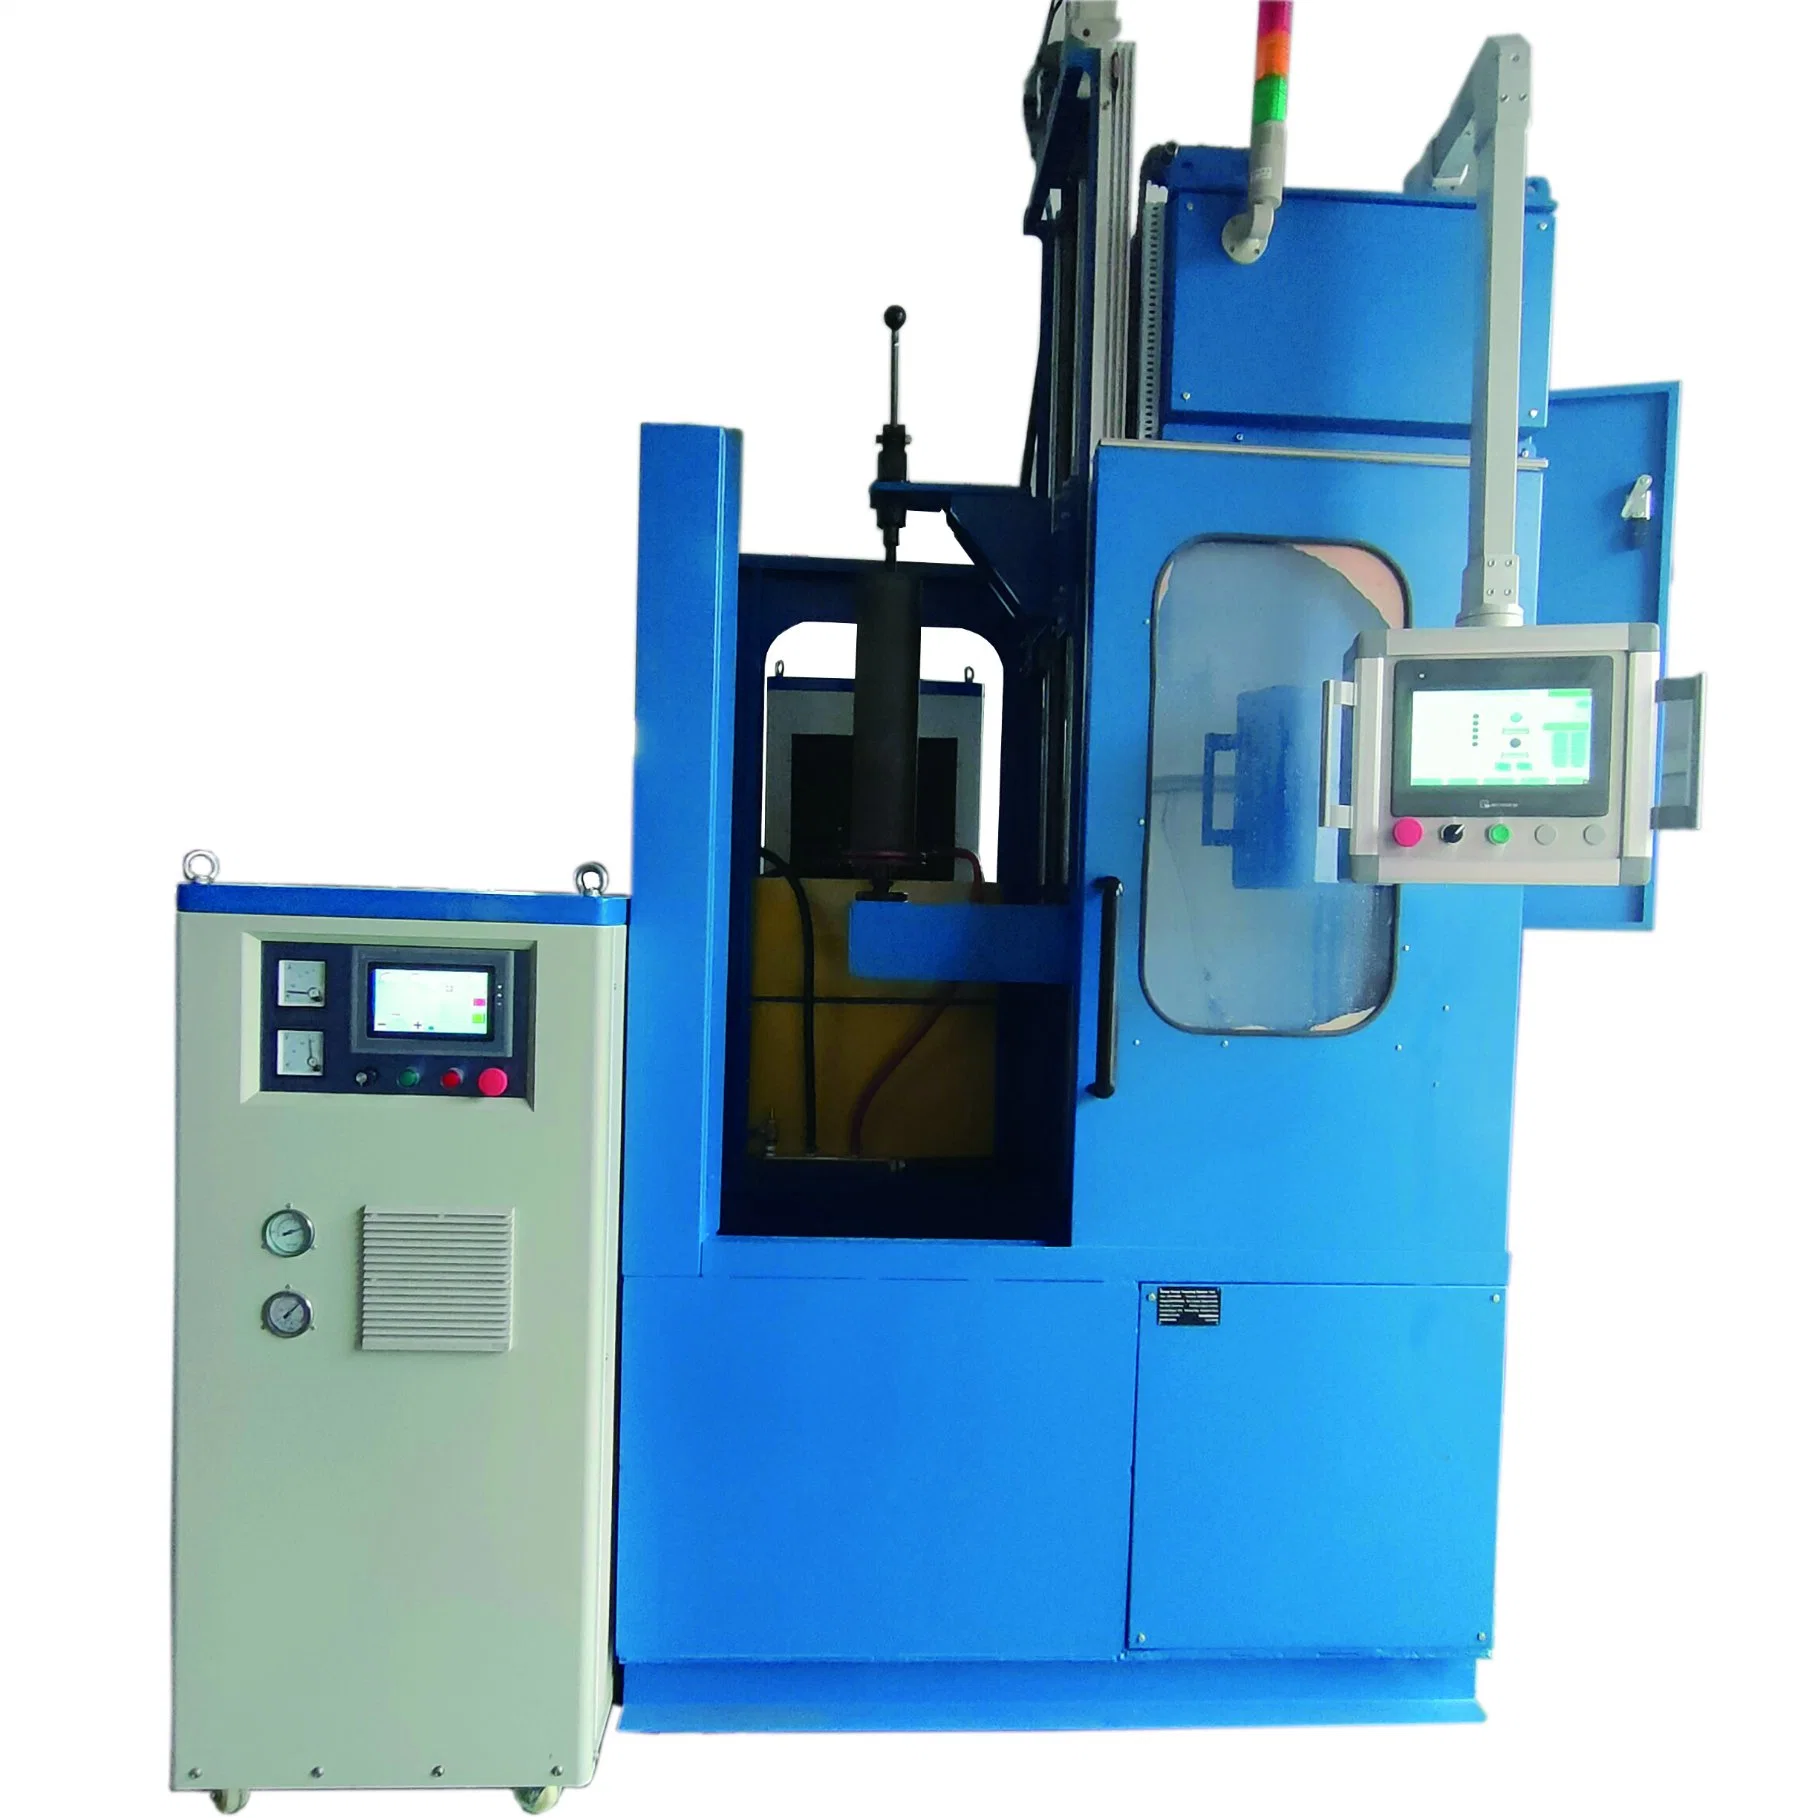 China Manufacturer Supply Vertical Quenching Machine Tool with 160kw Induction Heating Machine of Heat Treatment of Hardware Tools and Hand Tools